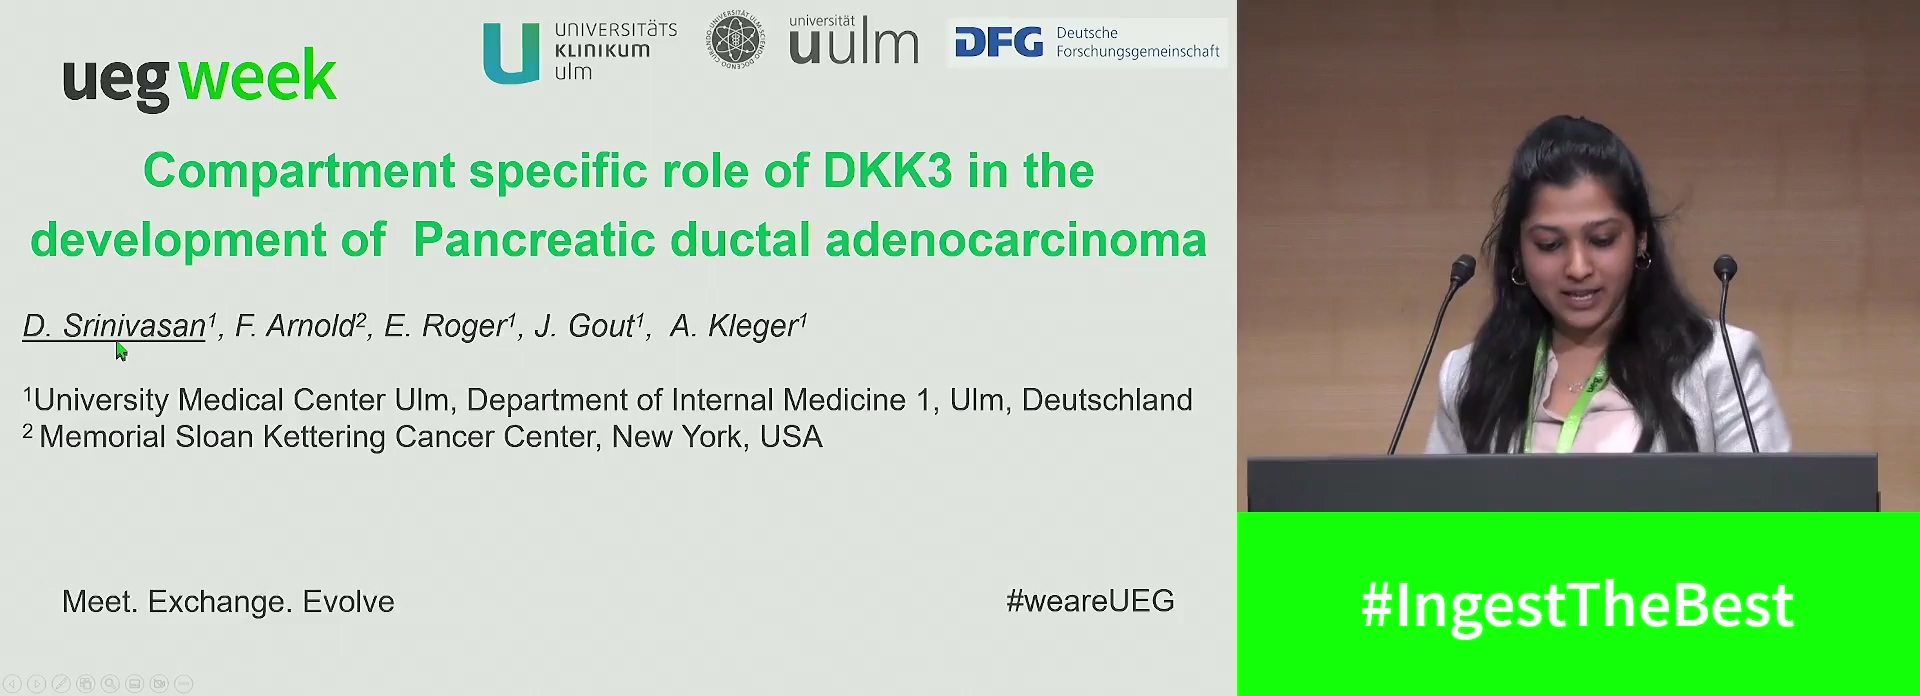 COMPARTMENT-SPECIFIC ROLE OF DKK3 IN THE DEVELOPMENT OF PANCREATIC DUCTAL ADENOCARCINOMA